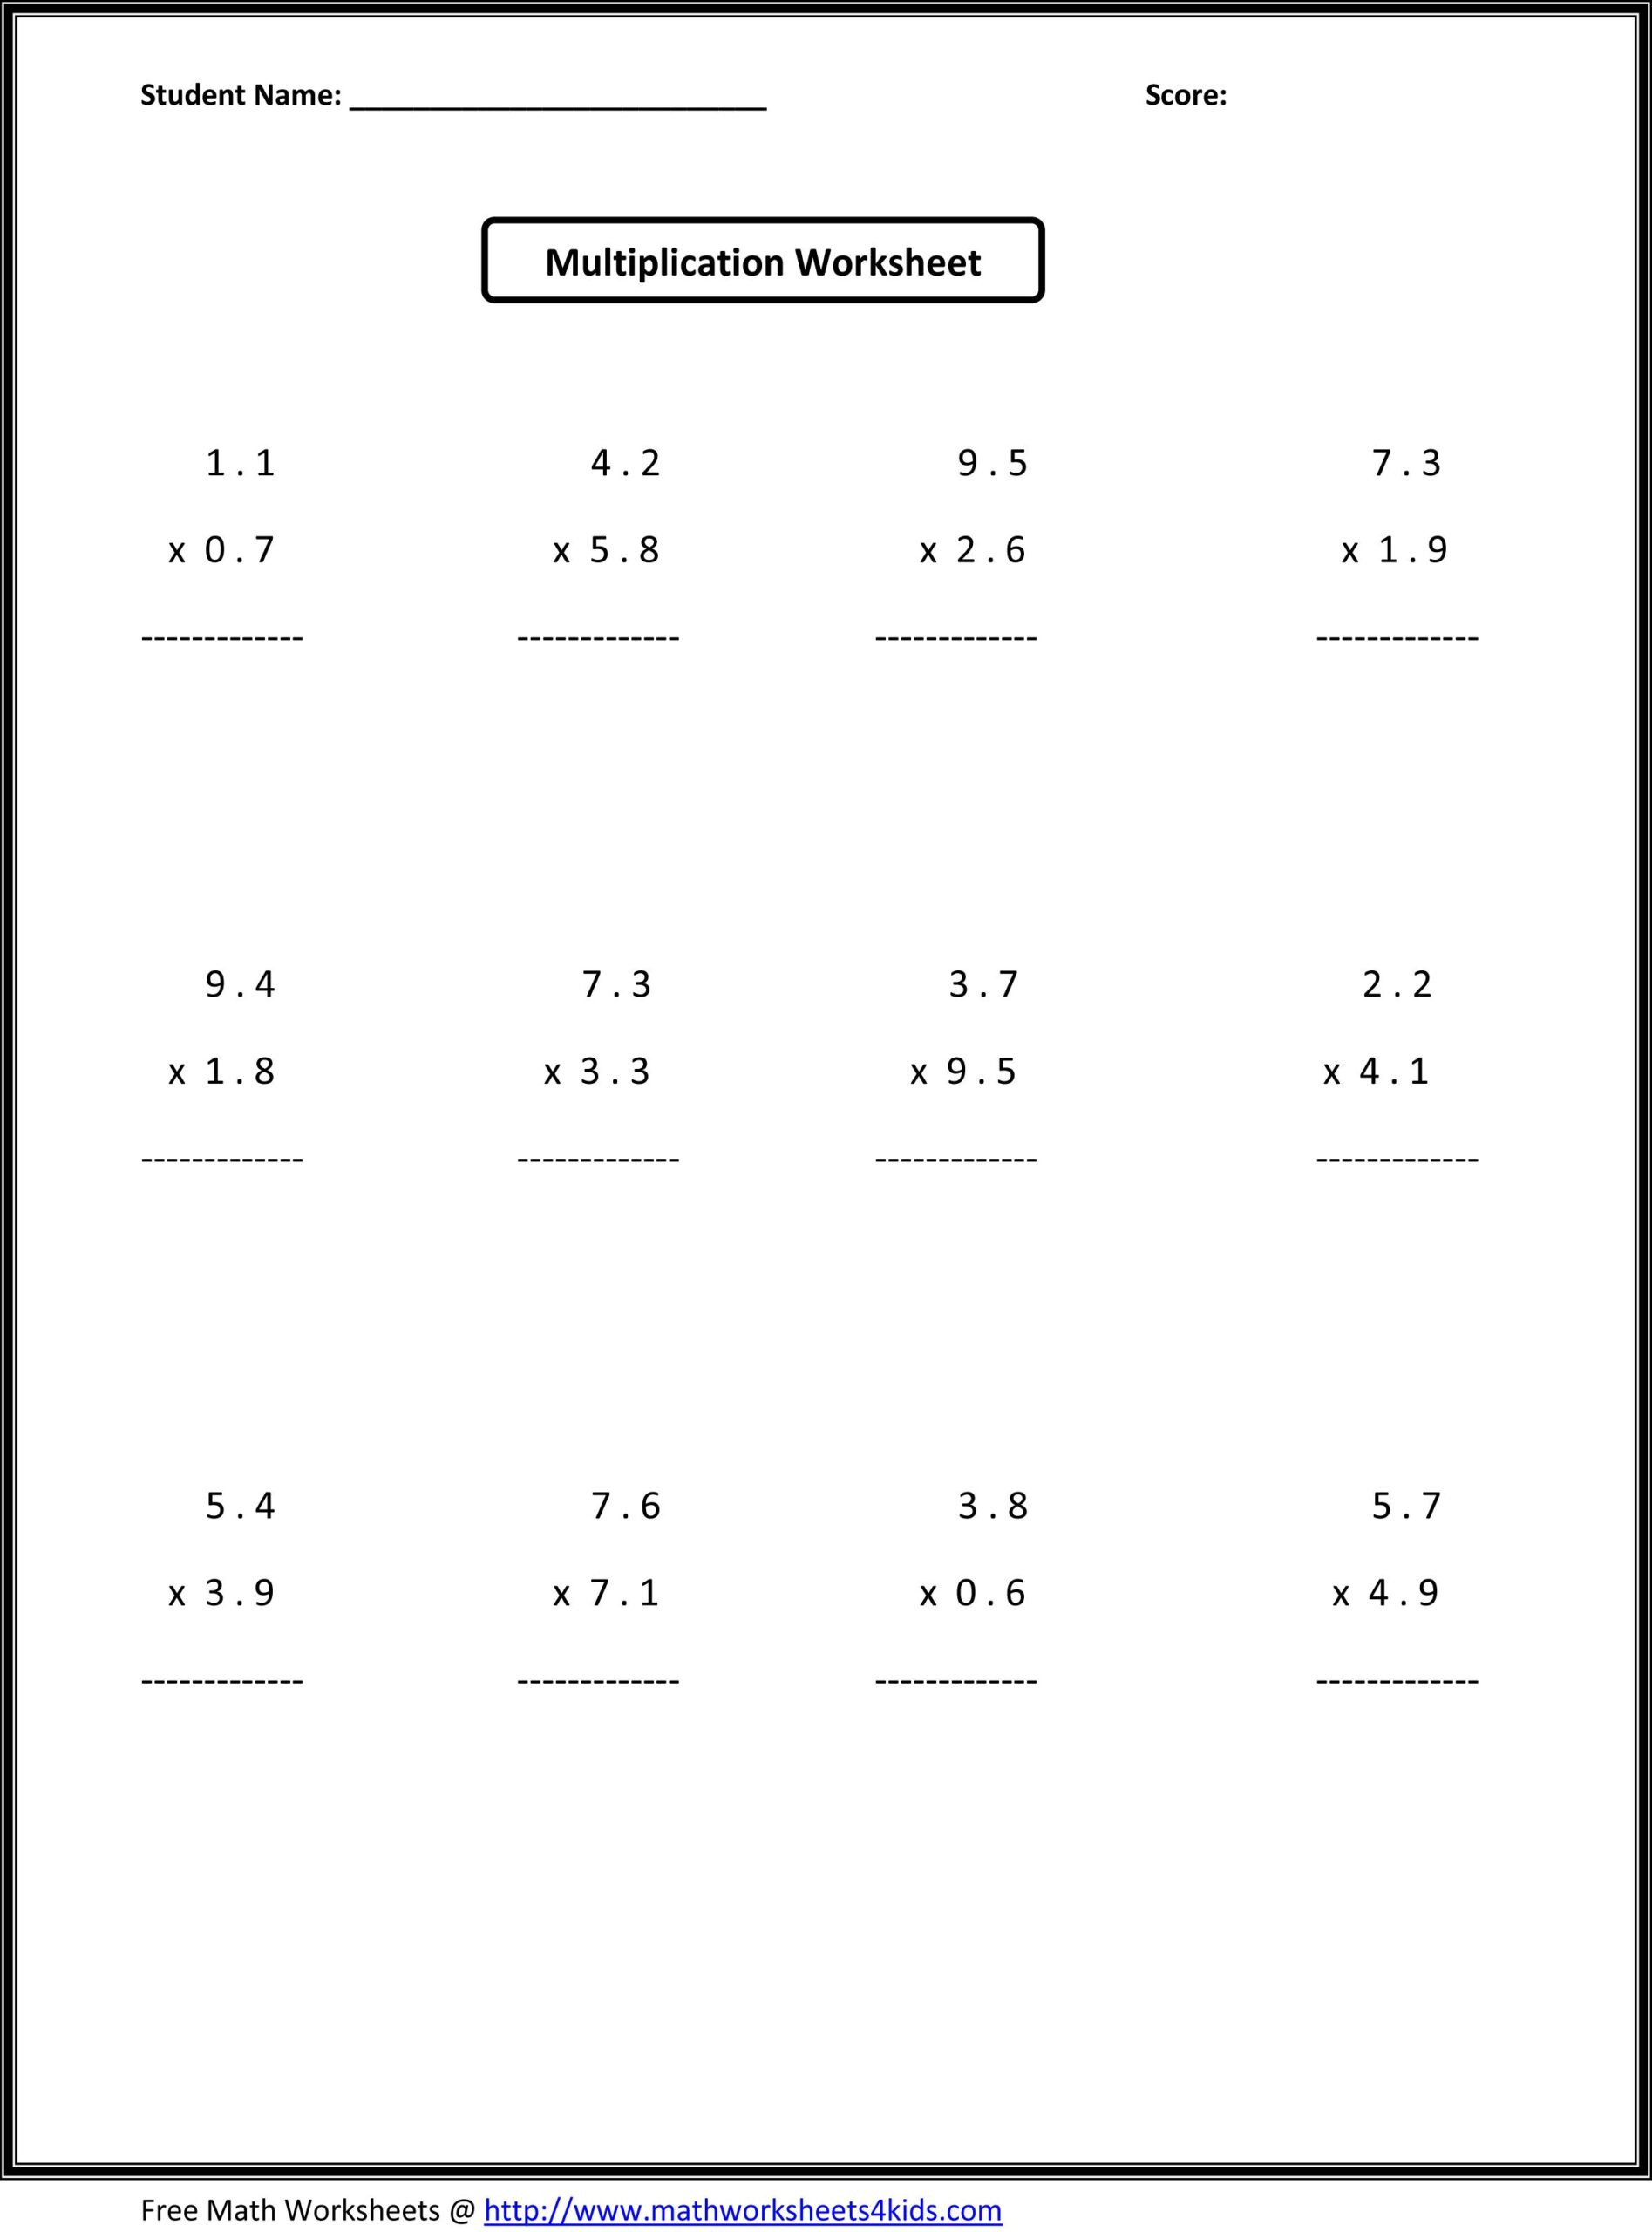 Multiplying Rational Numbers Worksheet 6th Grade Math Sheets Printable Middle School 7th Worksheets